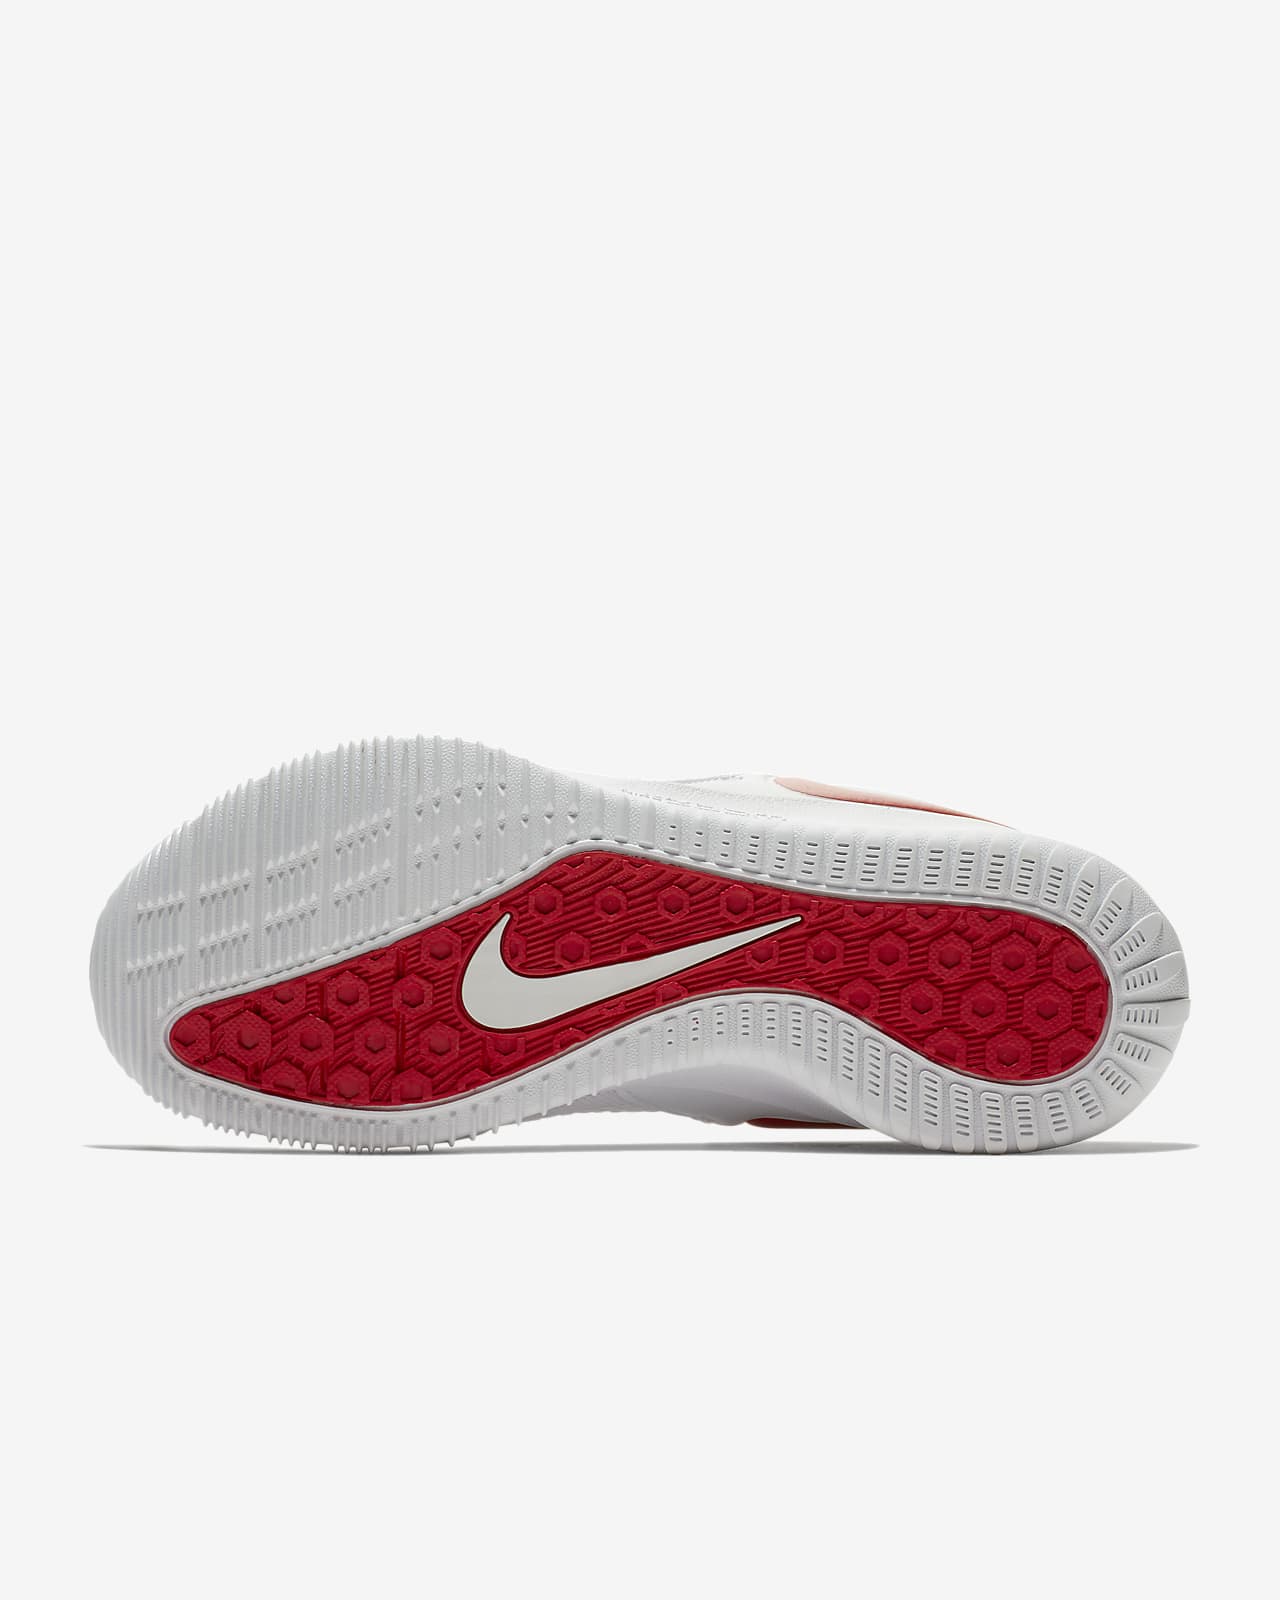 nike zoom hyperace 2 women's volleyball shoes